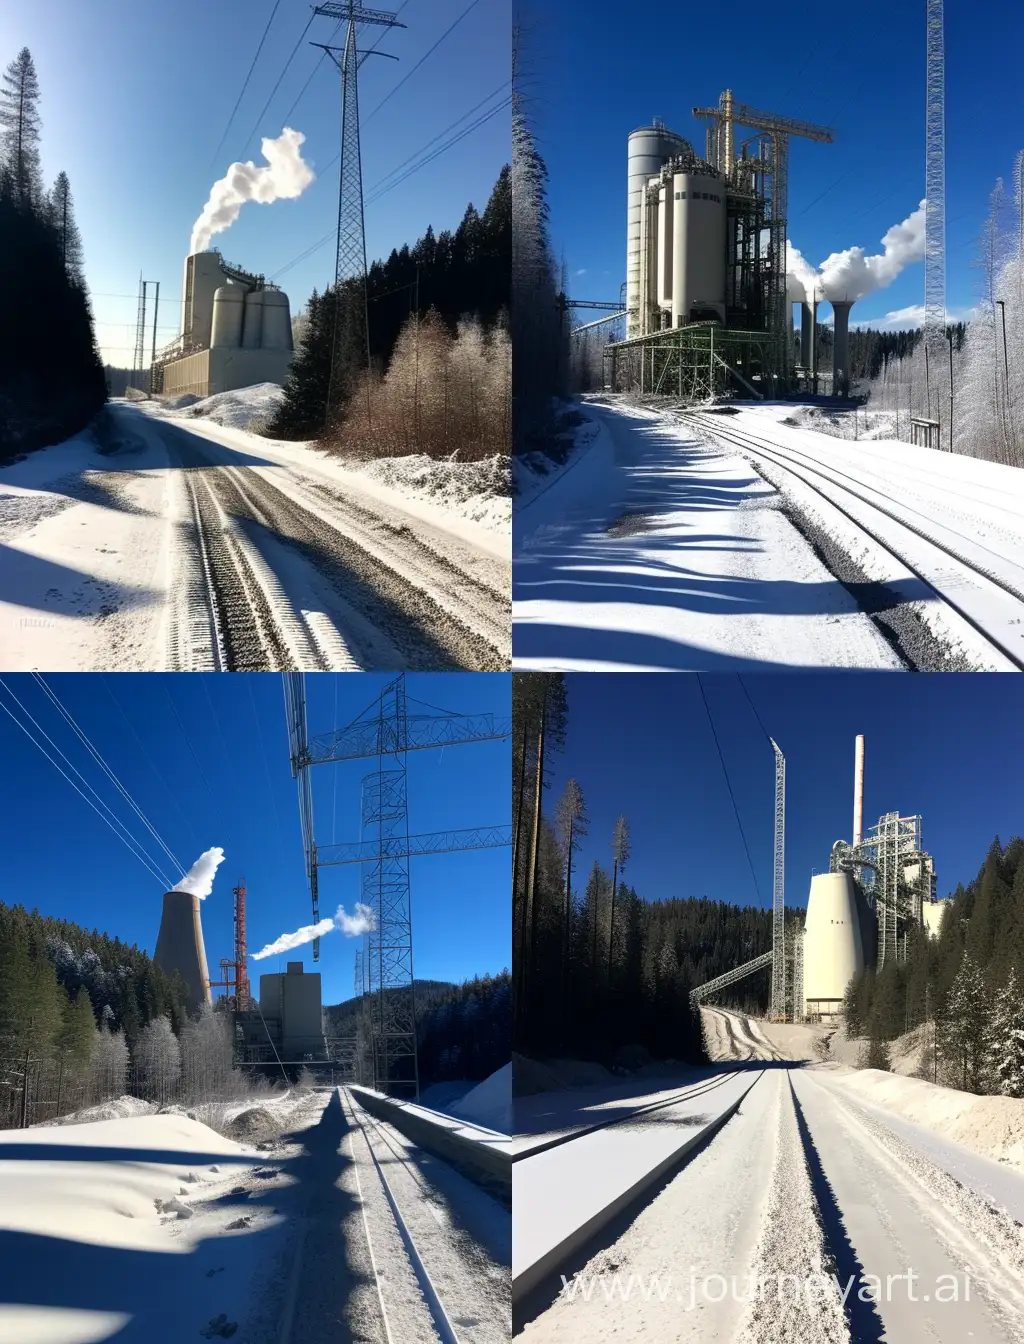 Frosty-Morning-at-Cement-Mixing-Plant-with-SnowCovered-Landscape